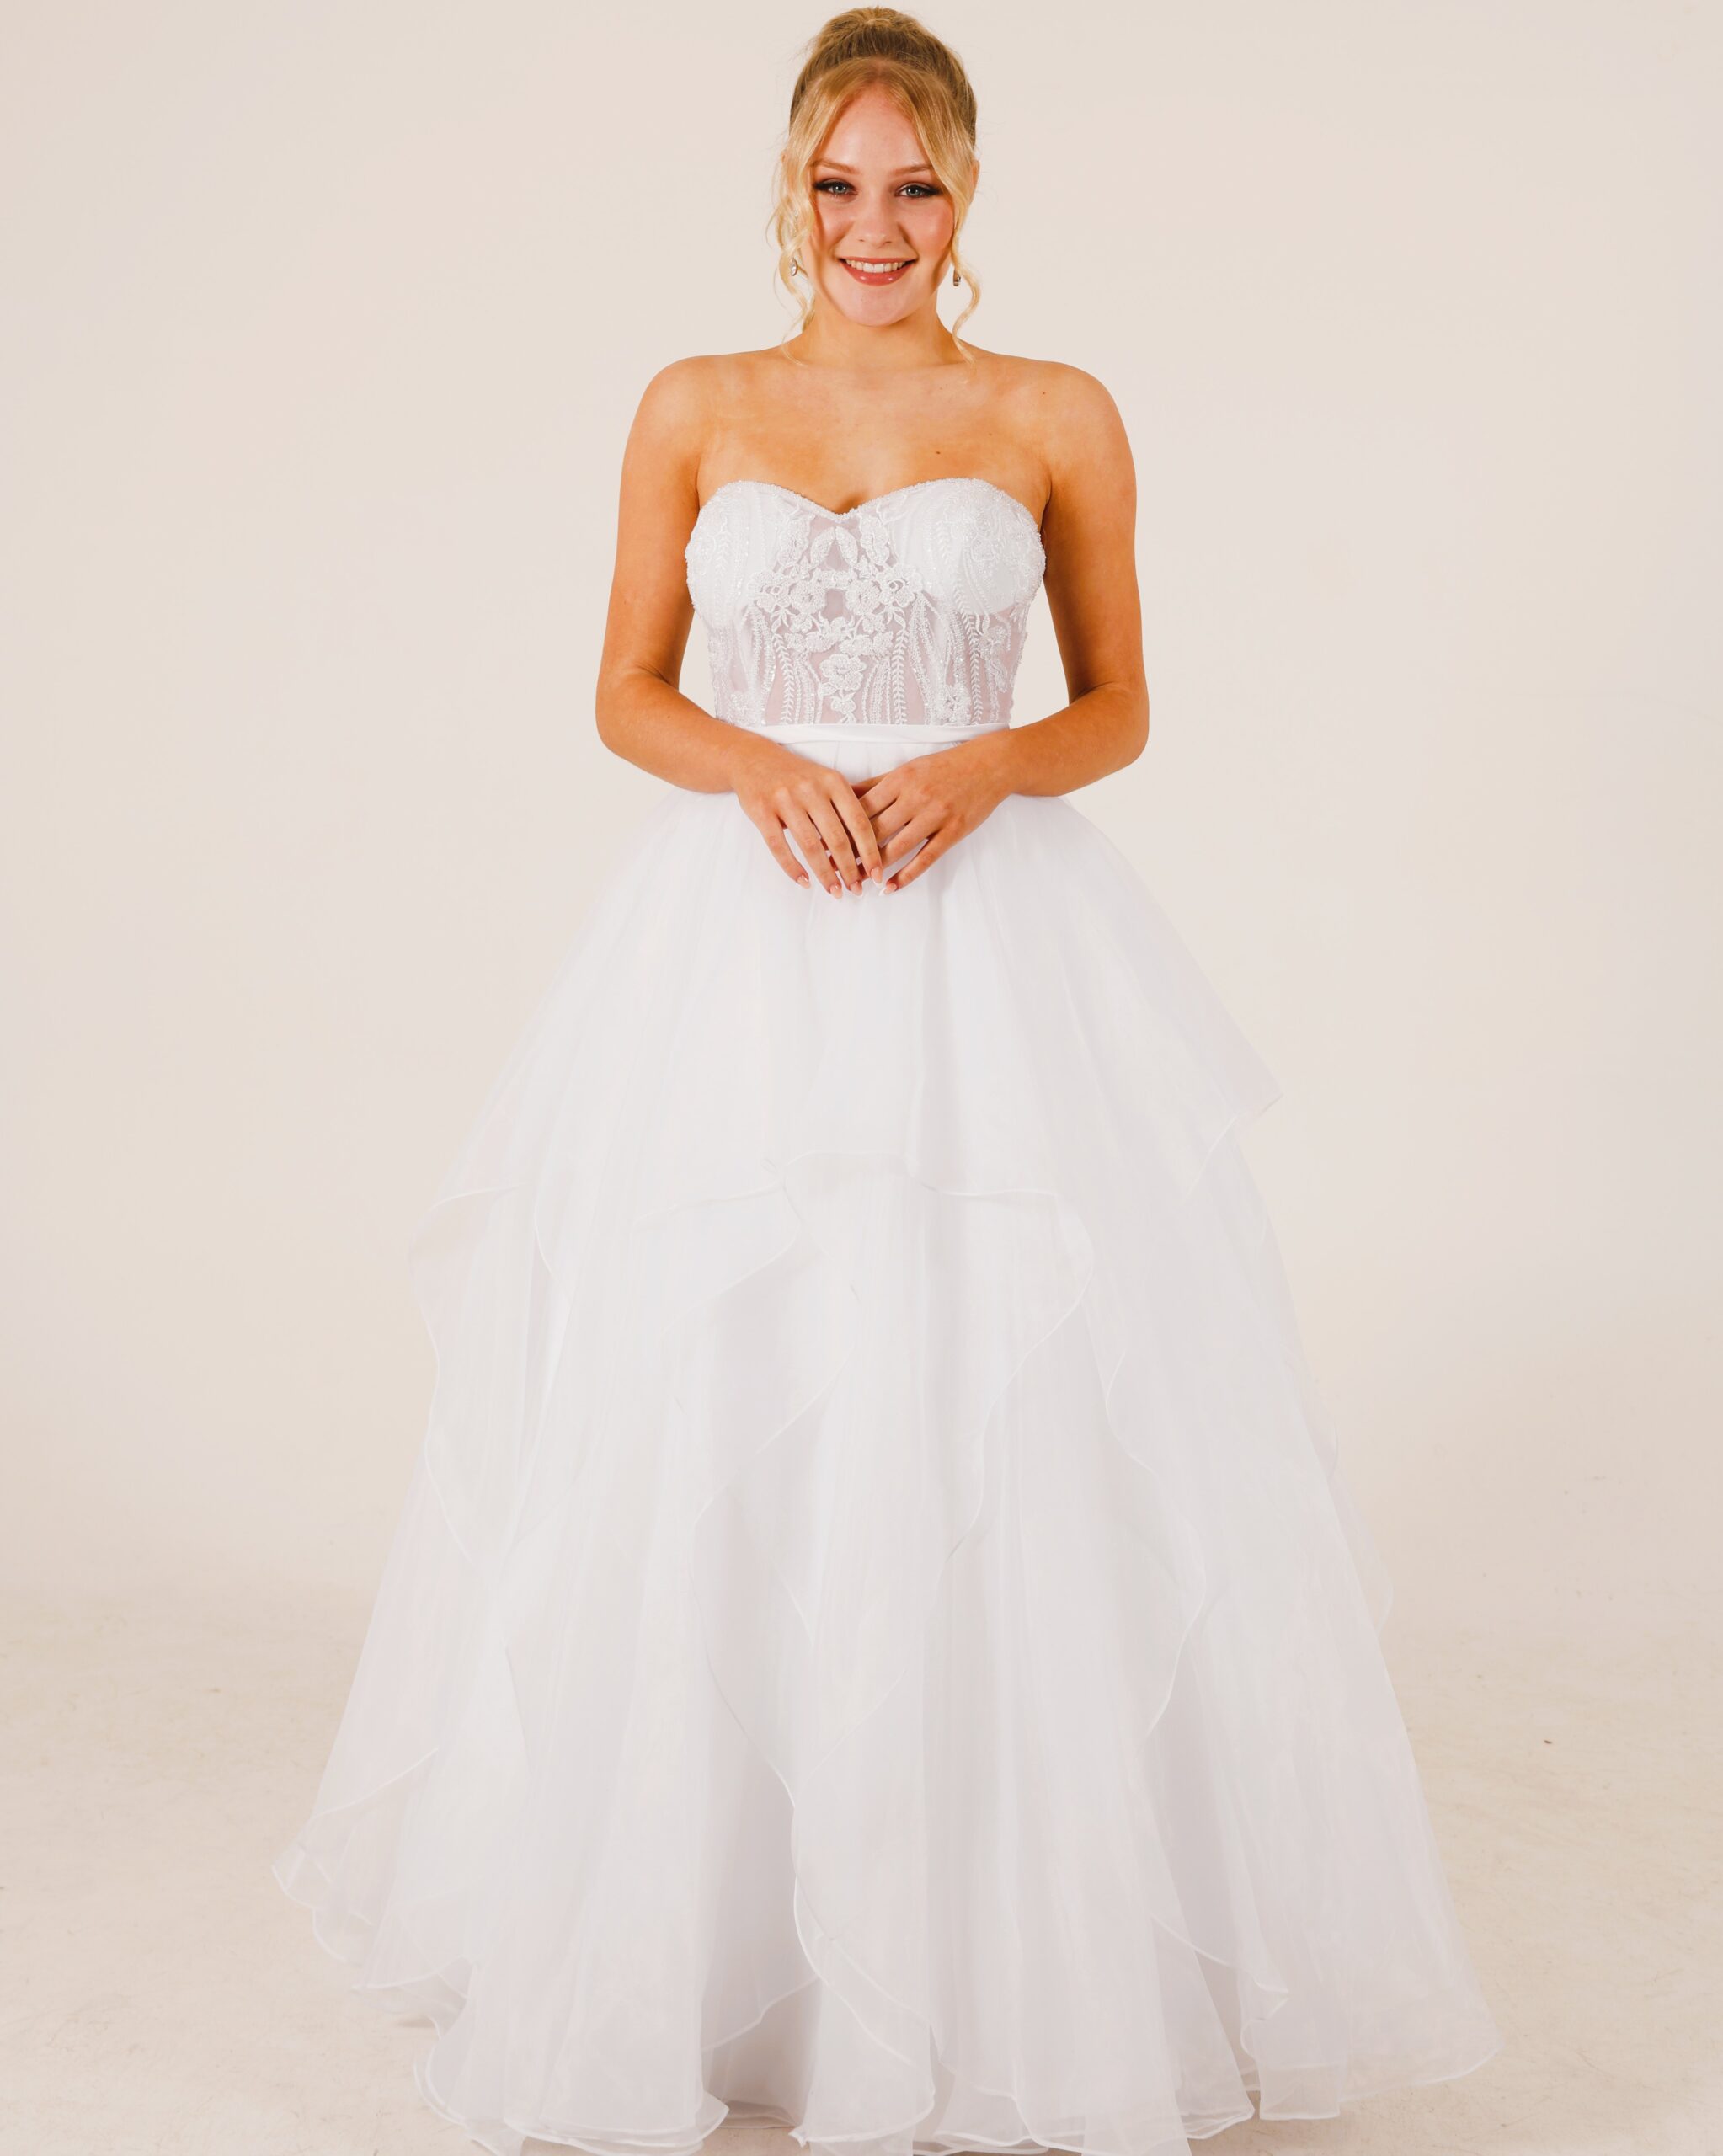 Lace bodice with waterfall skirt in organza